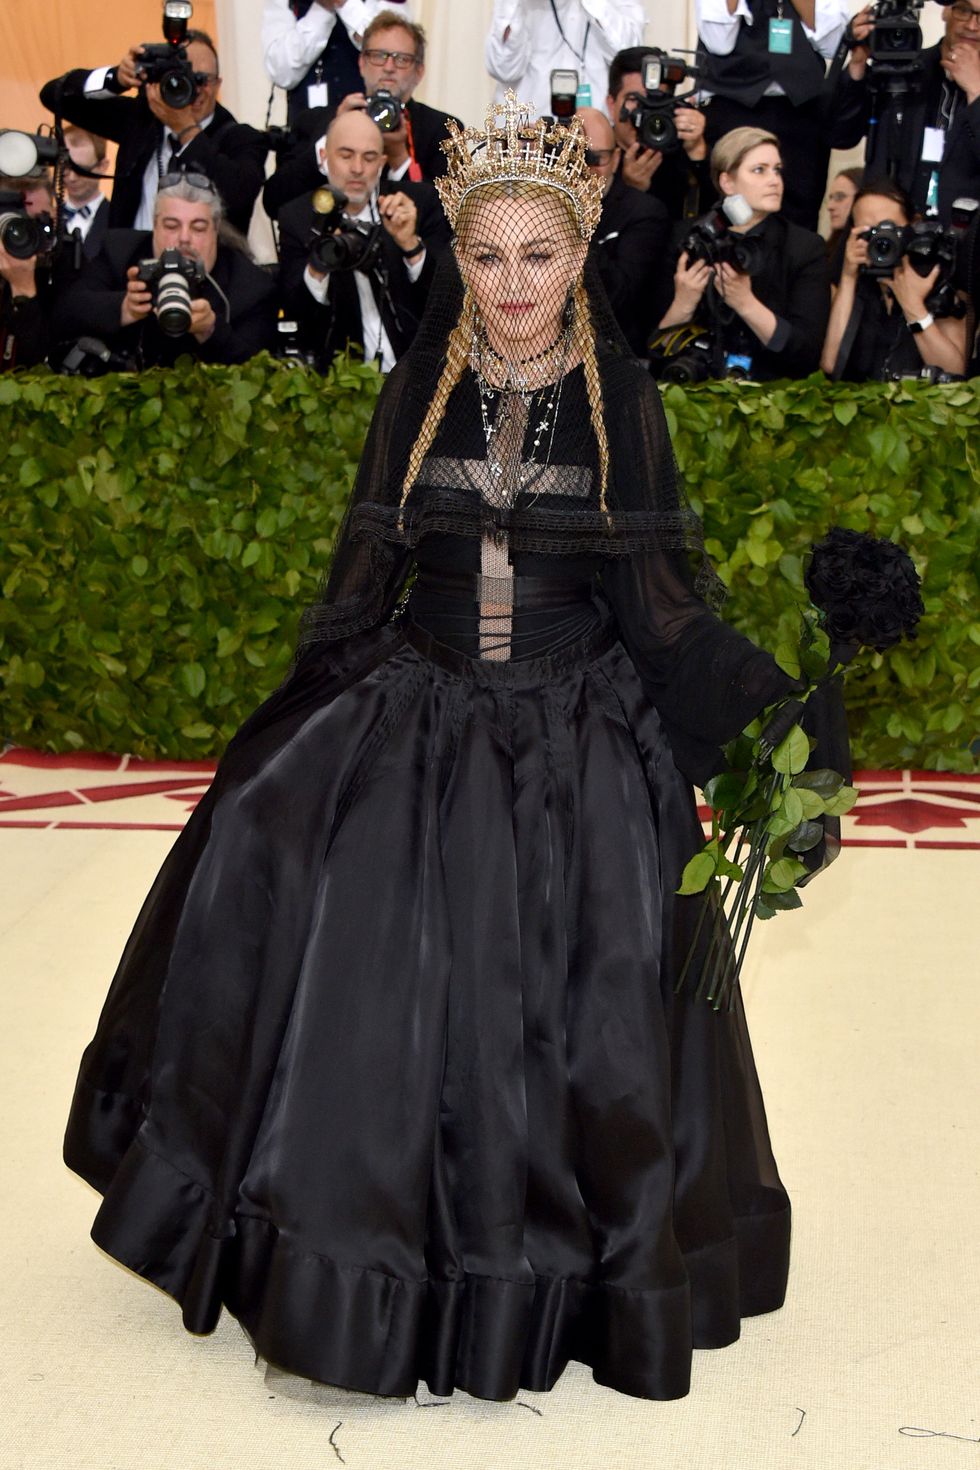 You Can Now Watch Madonna's Much Talked-About Met Gala Performance